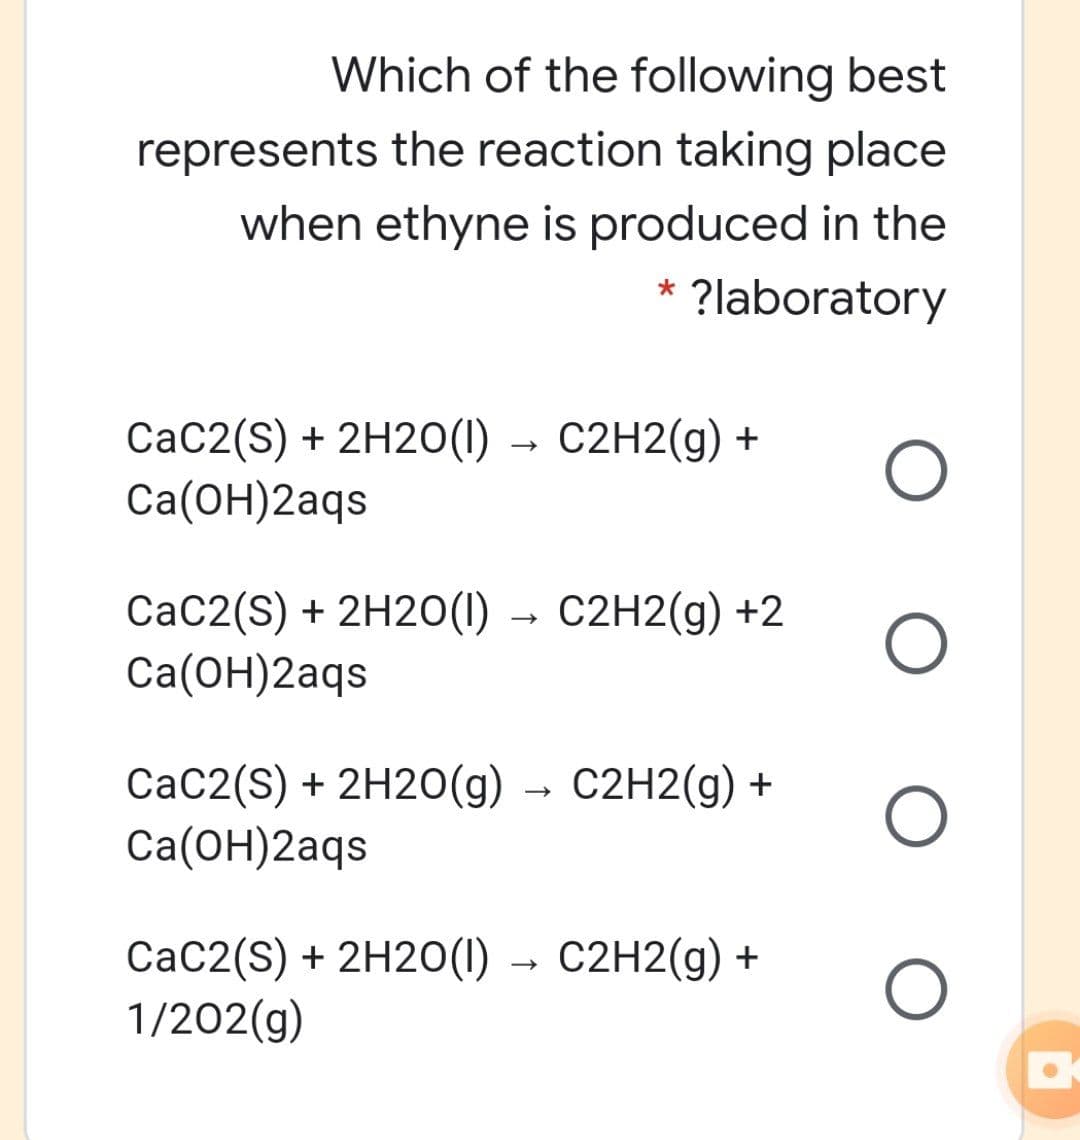 Which of the following best
represents the reaction taking place
when ethyne is produced in the
* ?laboratory
CaC2(S) + 2H20(1) → C2H2(g) +
Ca(ОН)2аgs
CaC2(S) + 2H20(1) → C2H2(g) +2
Cа(ОН)2аgs
CaC2(S) + 2H20(g) → C2H2(g) +
Cа(ОН)2аqs
CaC2(S) + 2H20(1) → C2H2(g) +
1/202(g)
